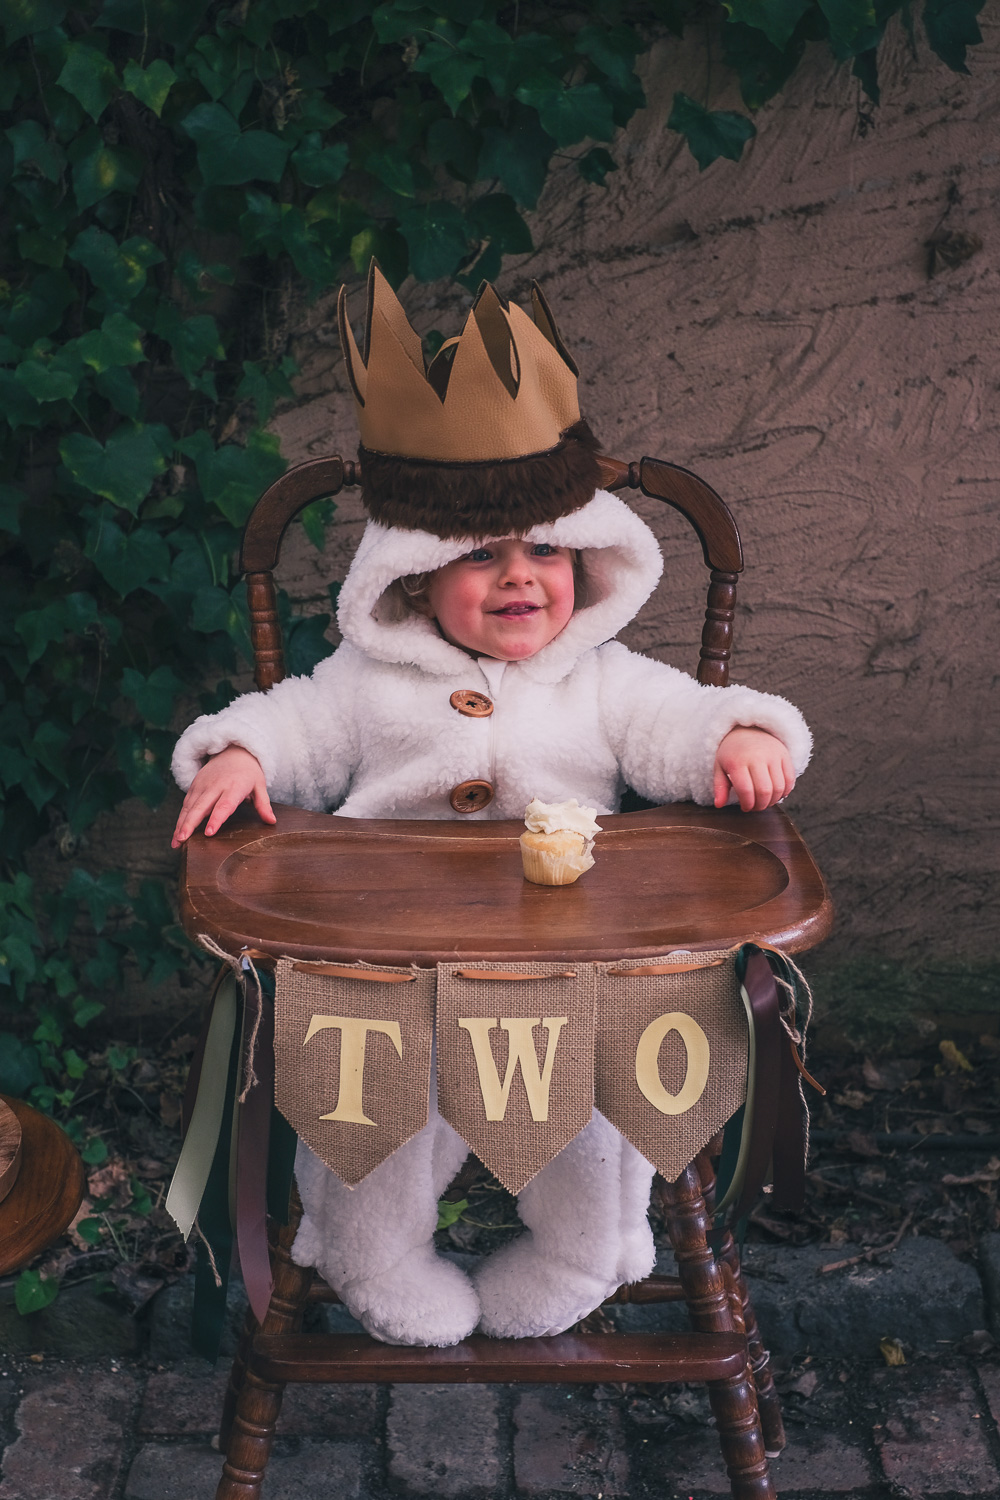 Child wearing Where The Wild Things Are party costume sits in a vintage high chair with bunting and ribbons